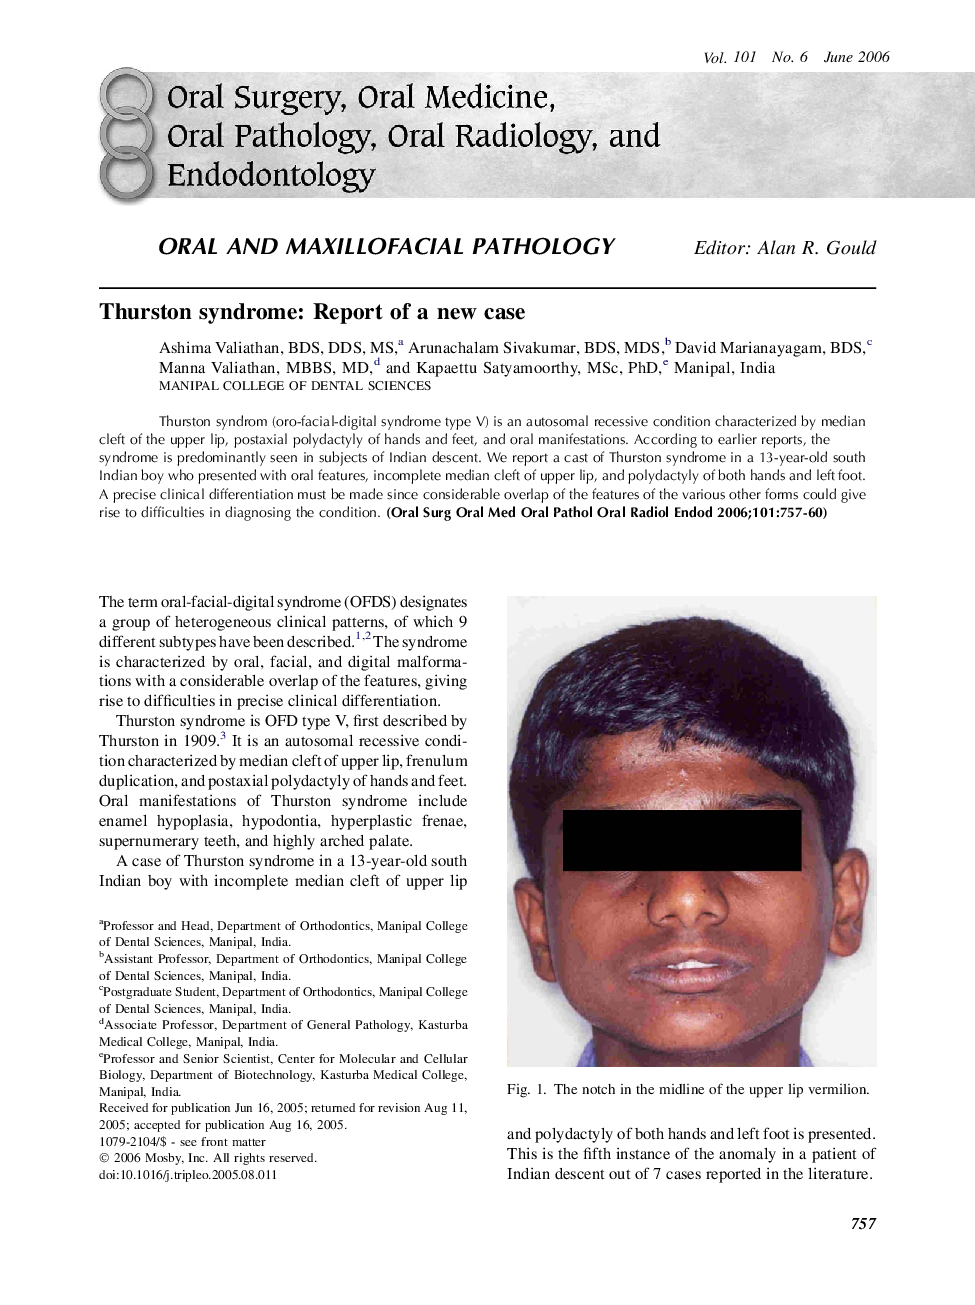 Thurston syndrome: Report of a new case